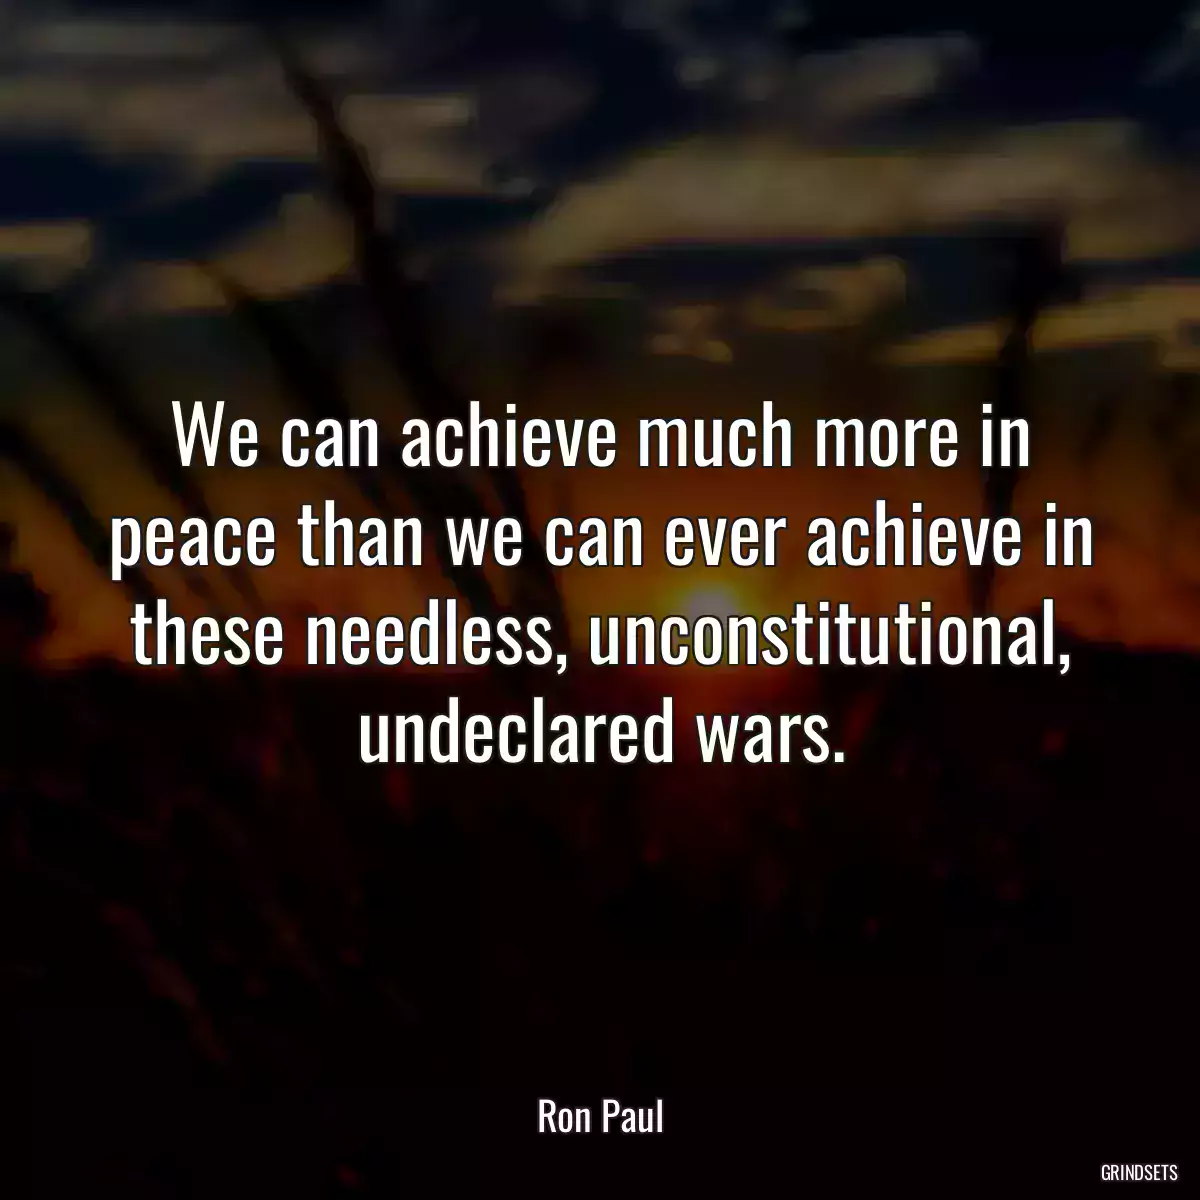 We can achieve much more in peace than we can ever achieve in these needless, unconstitutional, undeclared wars.